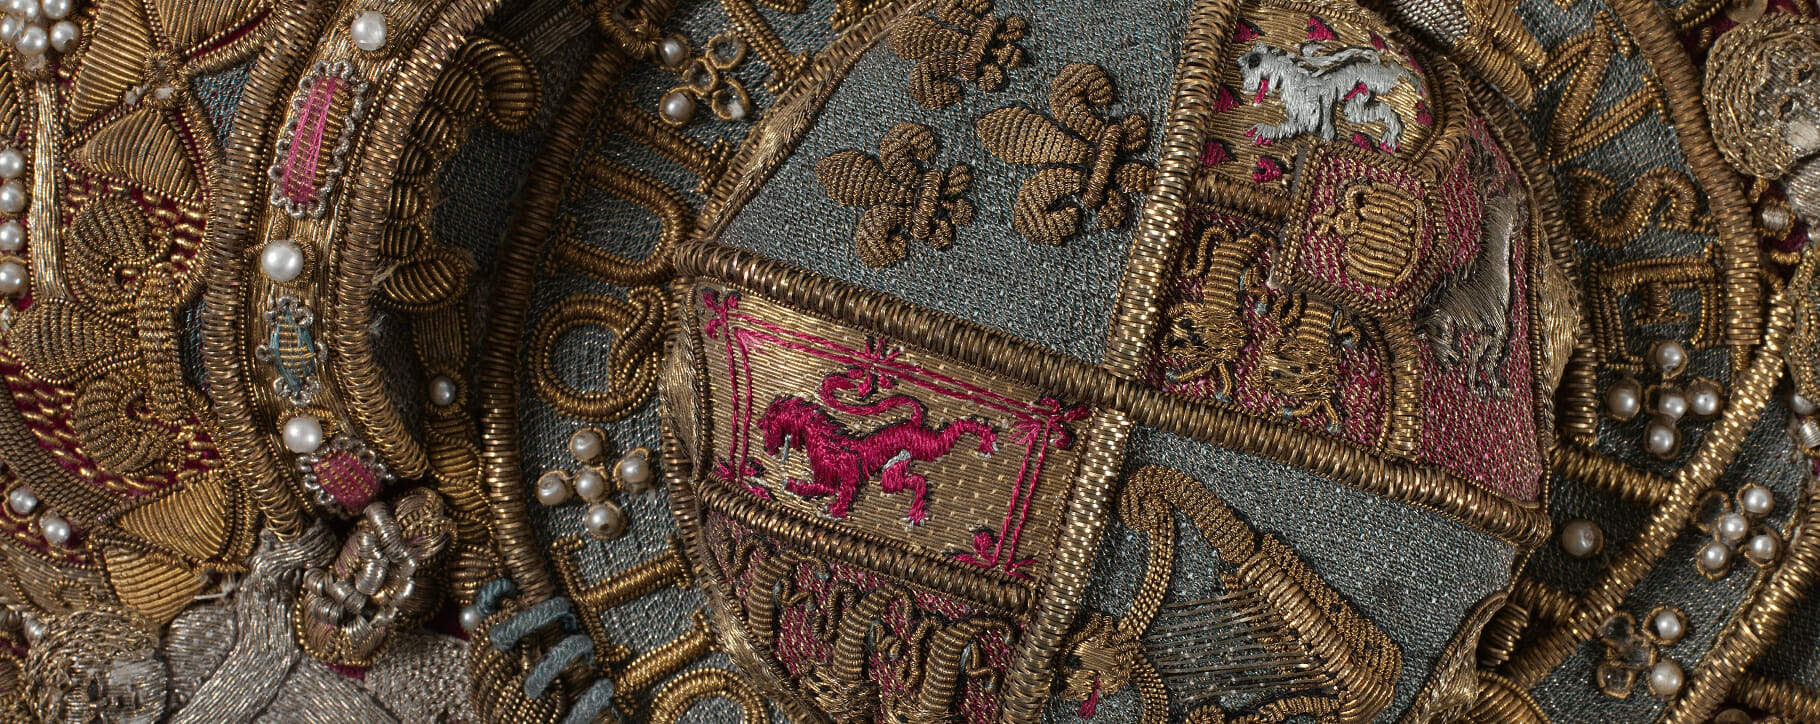 Detailed textile example